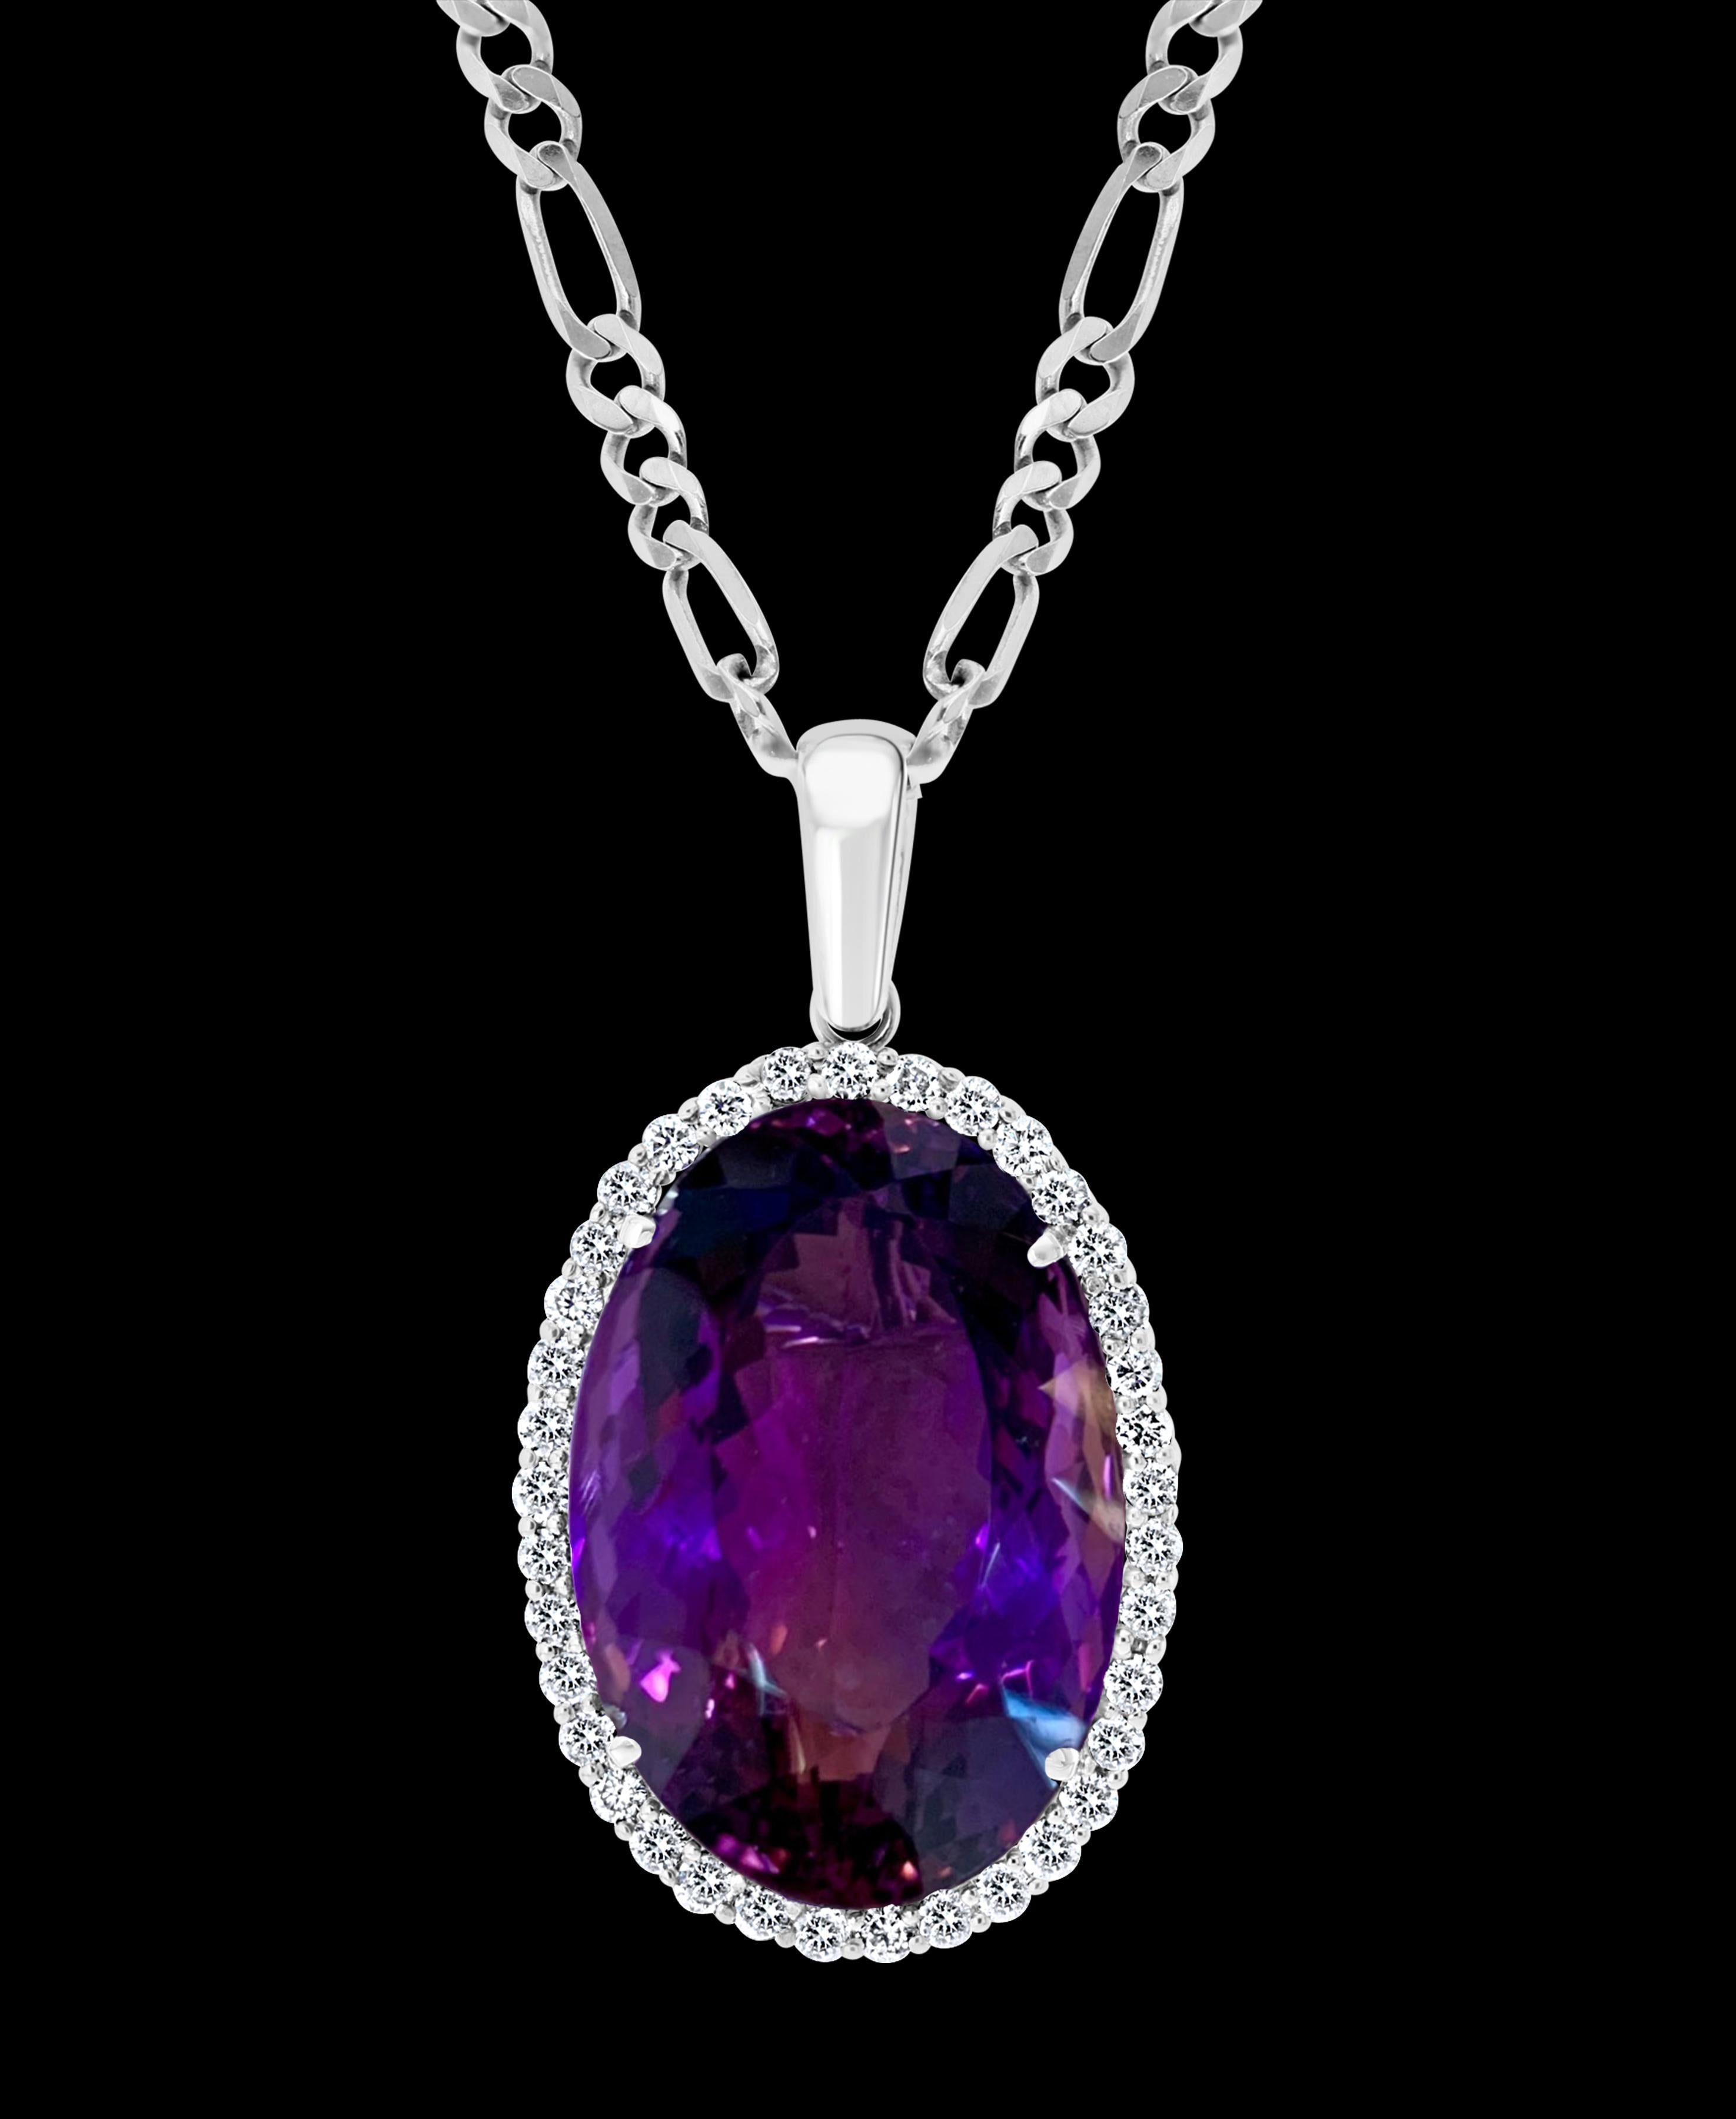   Approximately  78 Carat Amethyst & 3.5 Ct Diamond Pendant Necklace 14 Karat White Gold + Chain
This spectacular Pendant Necklace  consisting of a single large Oval Amethyst , approximately  78 Carat.  The  Amethyst   Has Circle of diamonds around